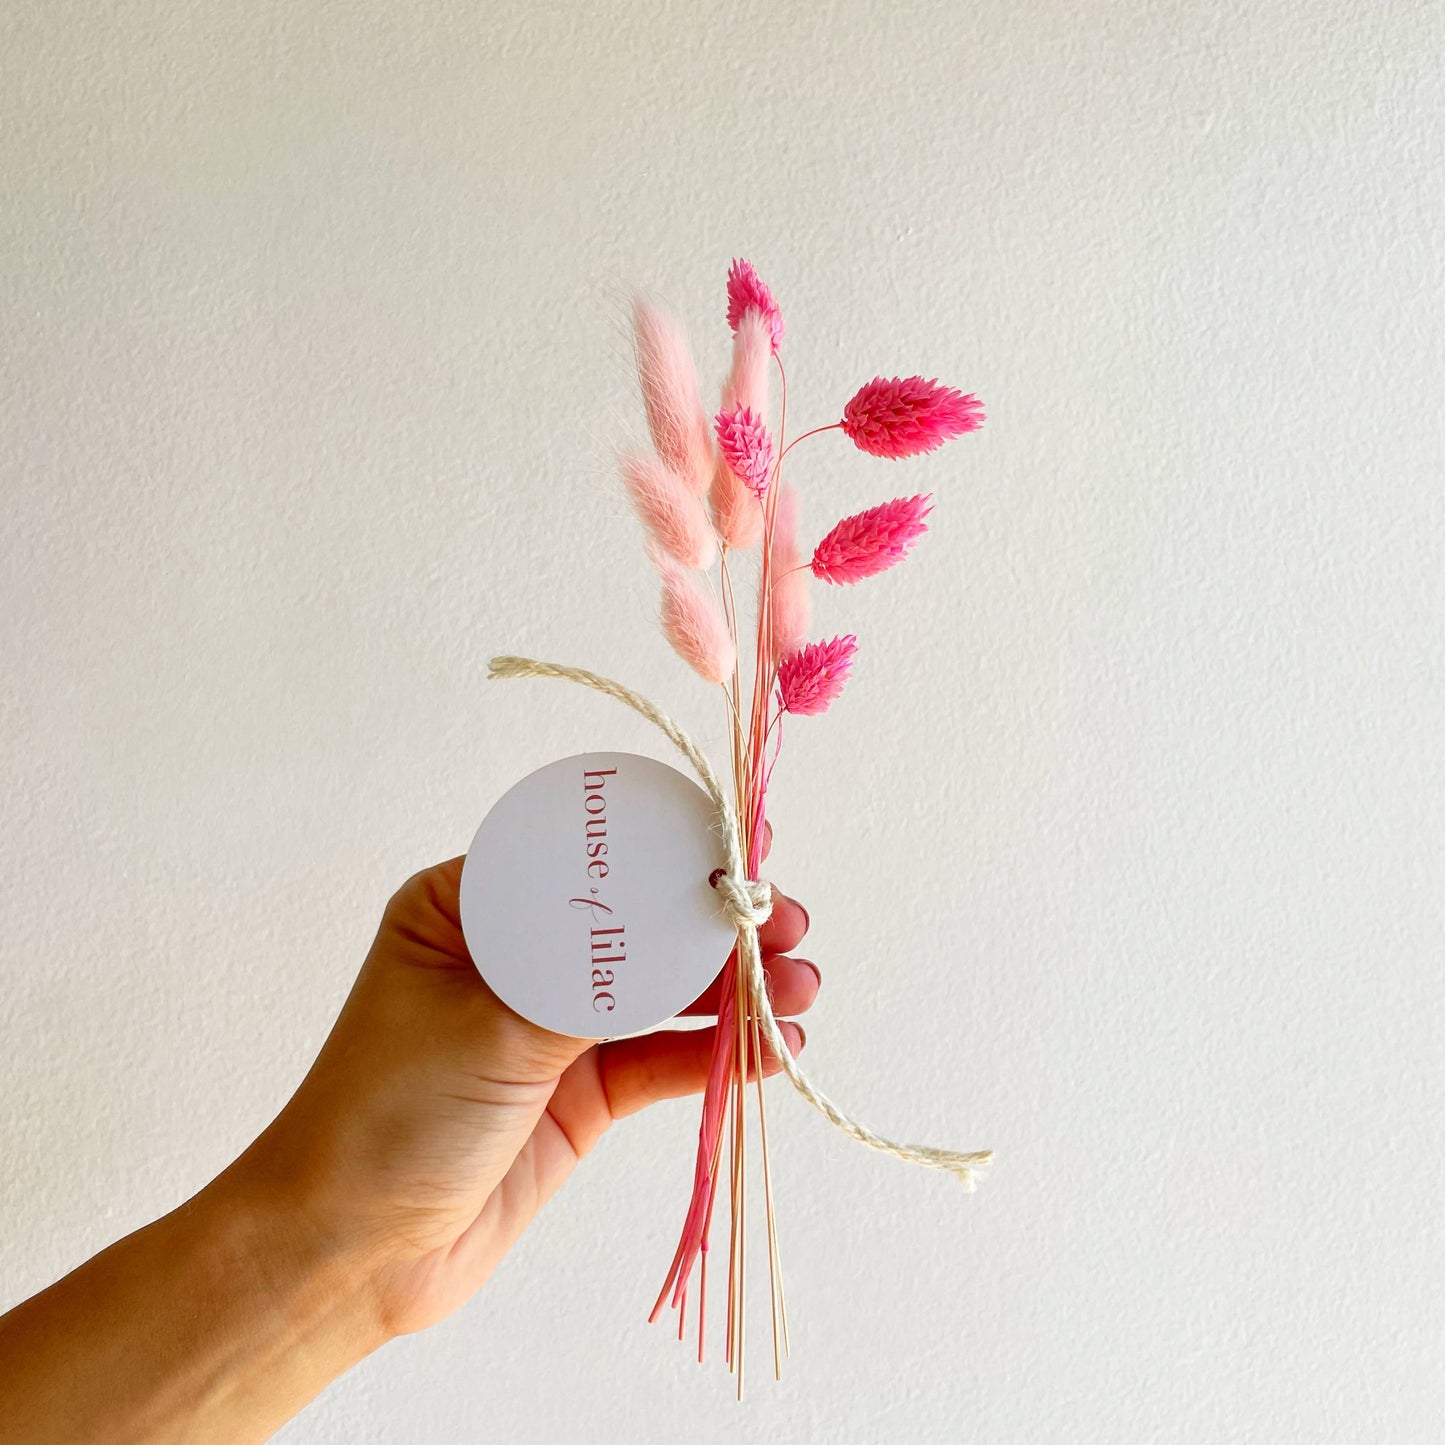 Dried Flowers: Bunny Tail Bundle (Light Pink and Dark Pink).